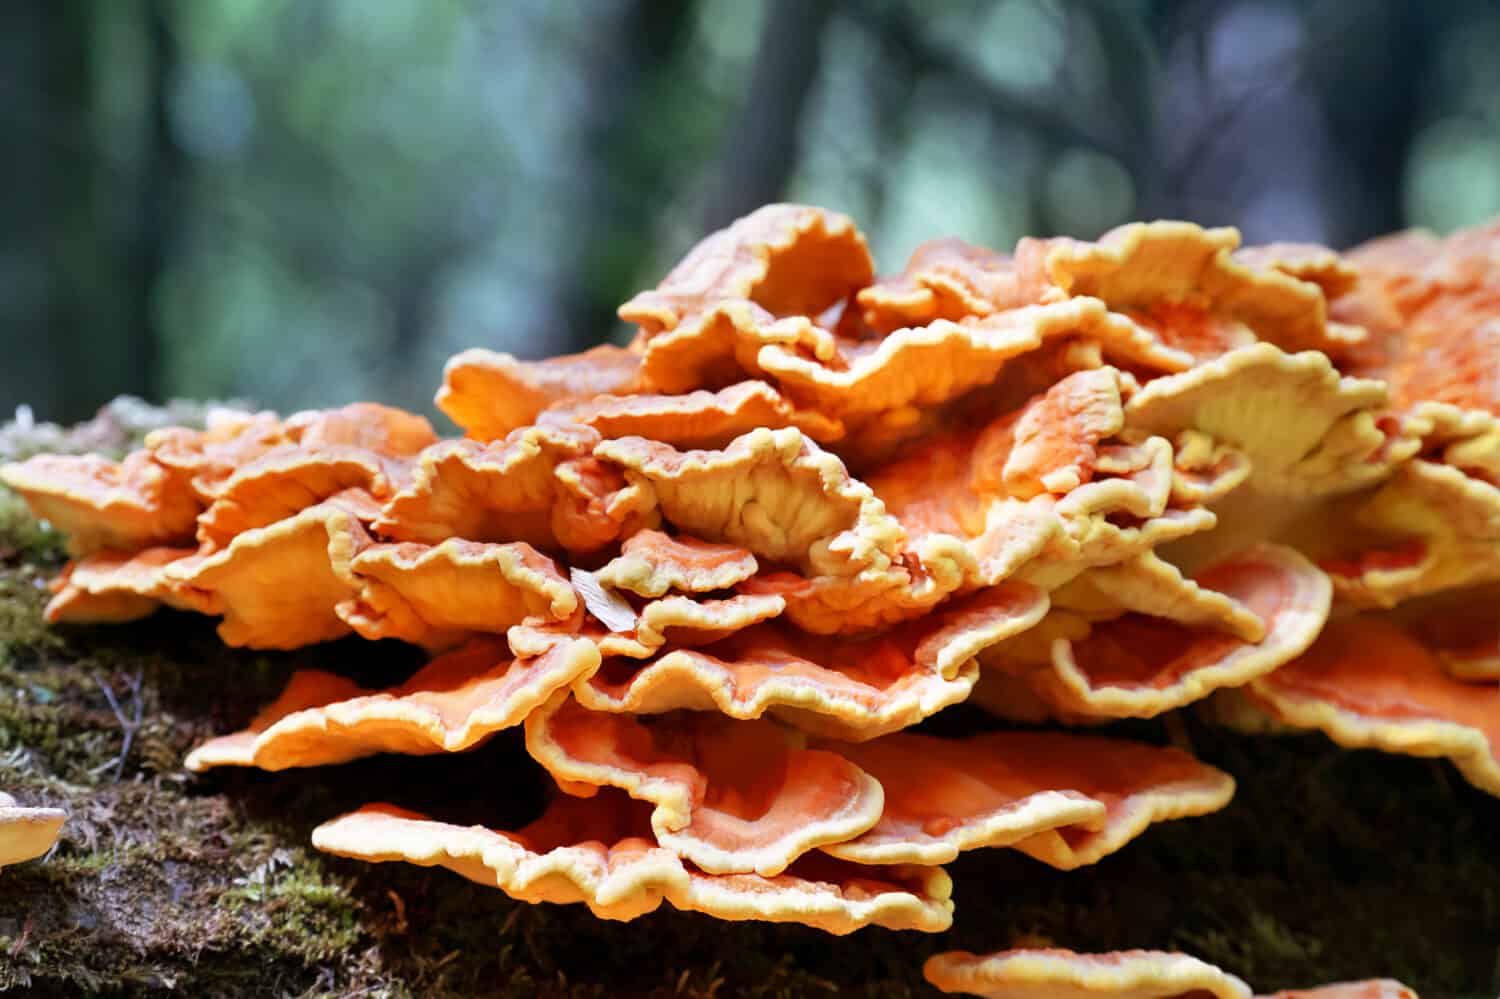 Laetiporus sulphureus,  crab-of-the-woods, sulphur polypore, sulphur shelf, or chicken-of-the-woods. Close-up of mushrooms on a fallen tree in the forest.  Soft selective focus.